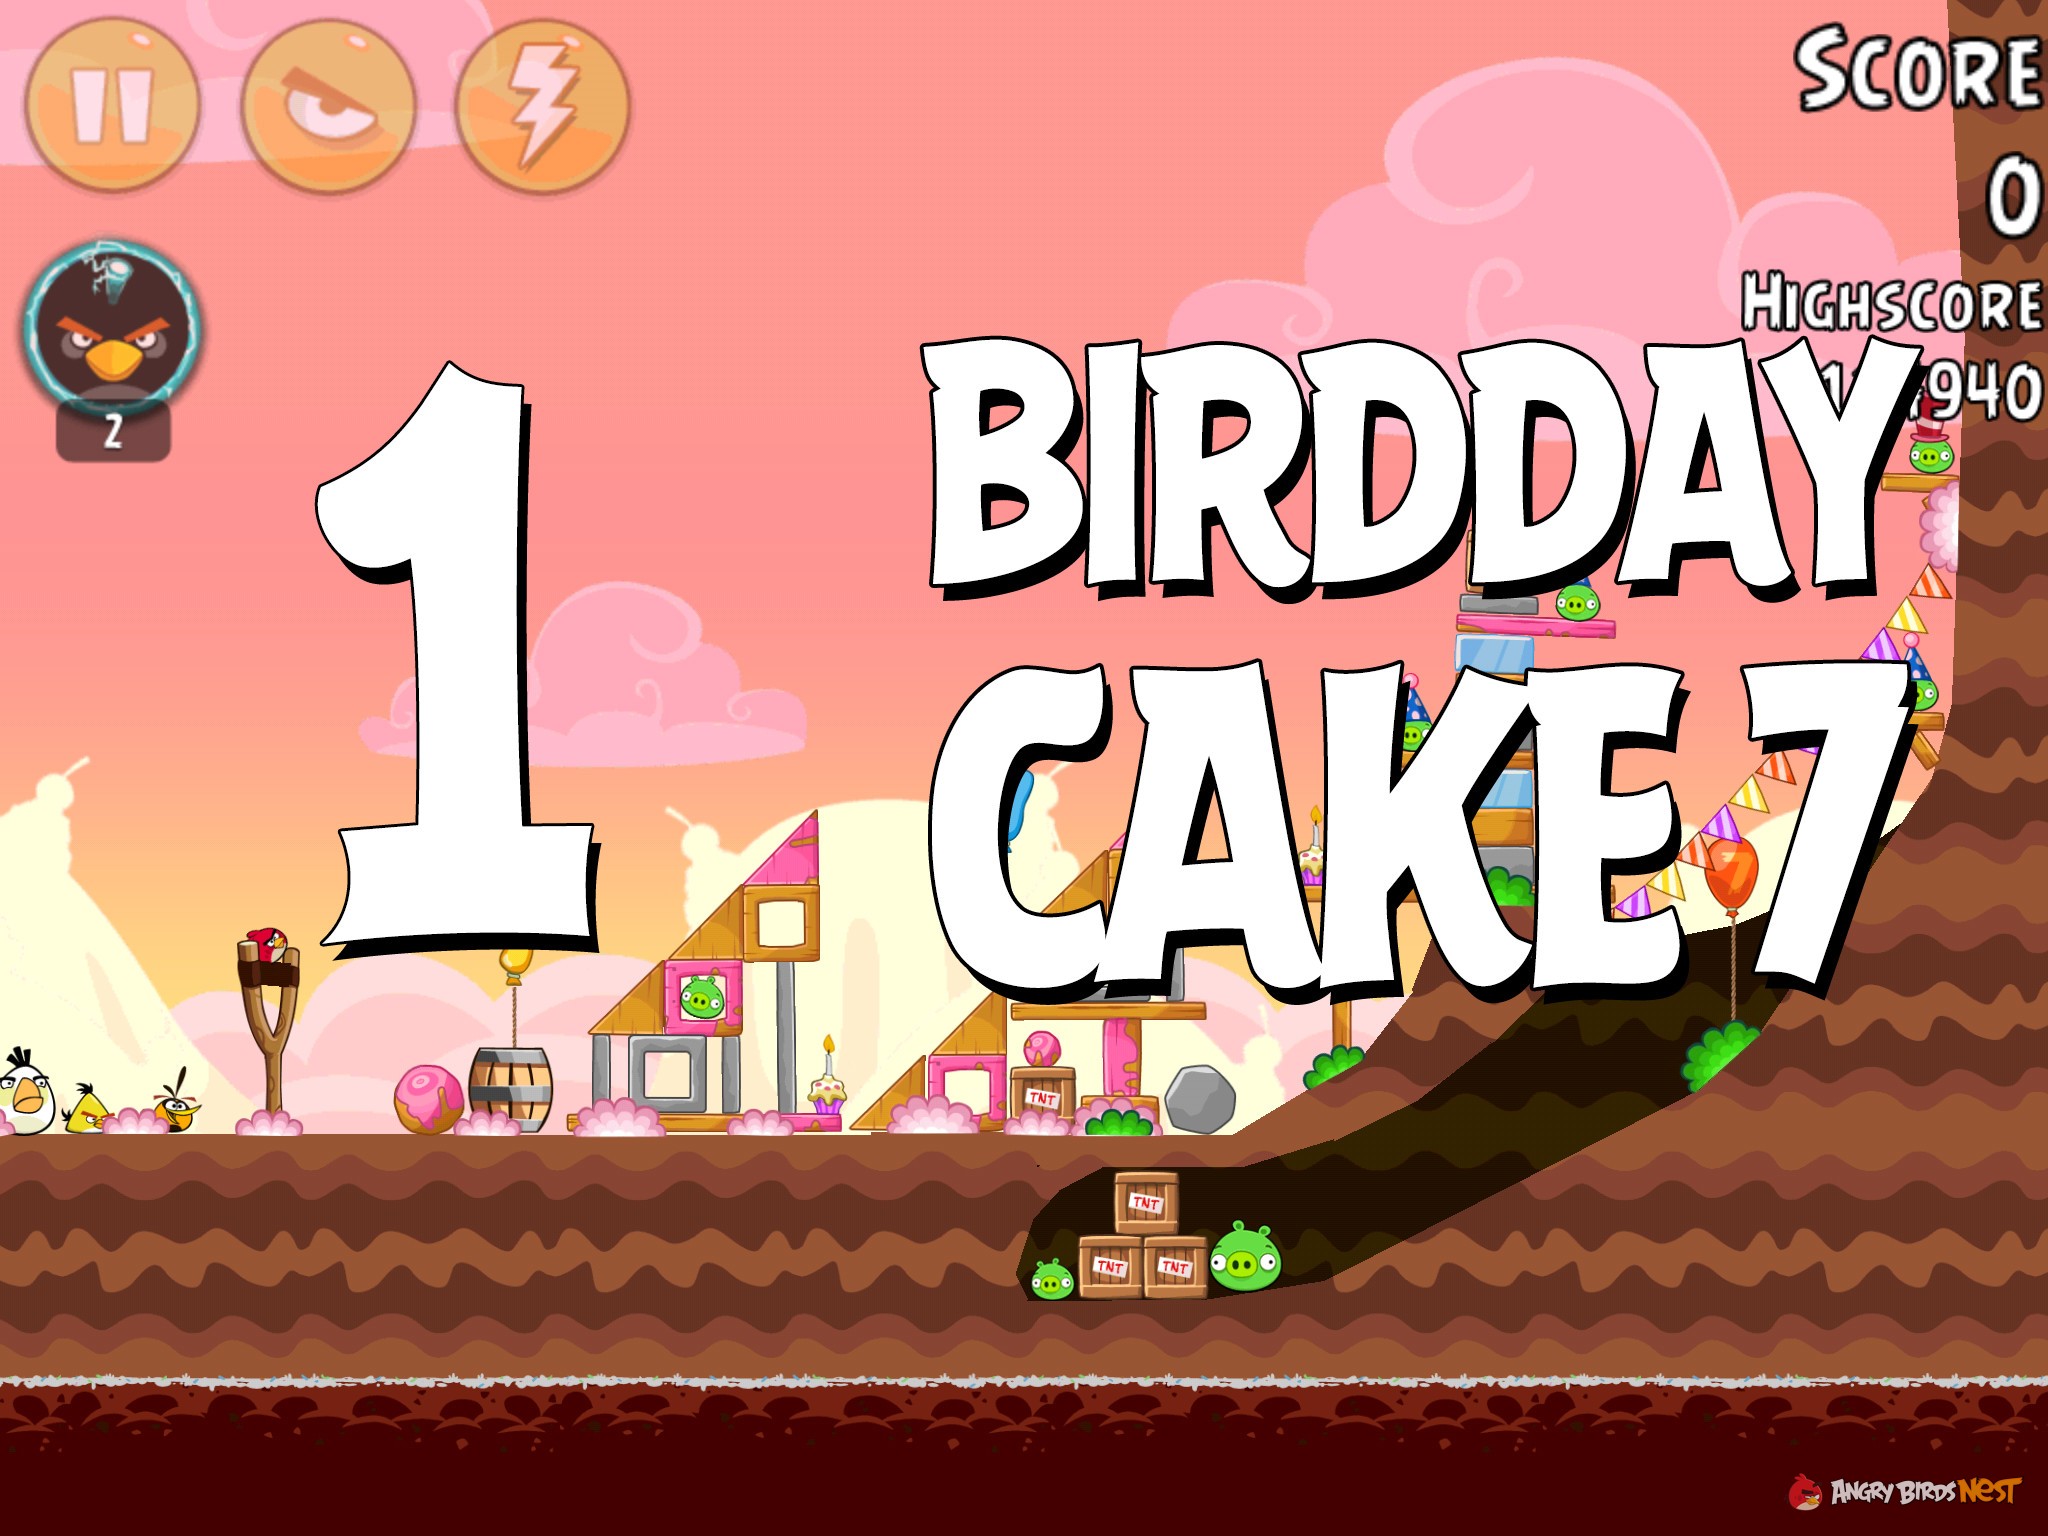 Angry-Birds-Birdday-Party-Cake-7-Level-1